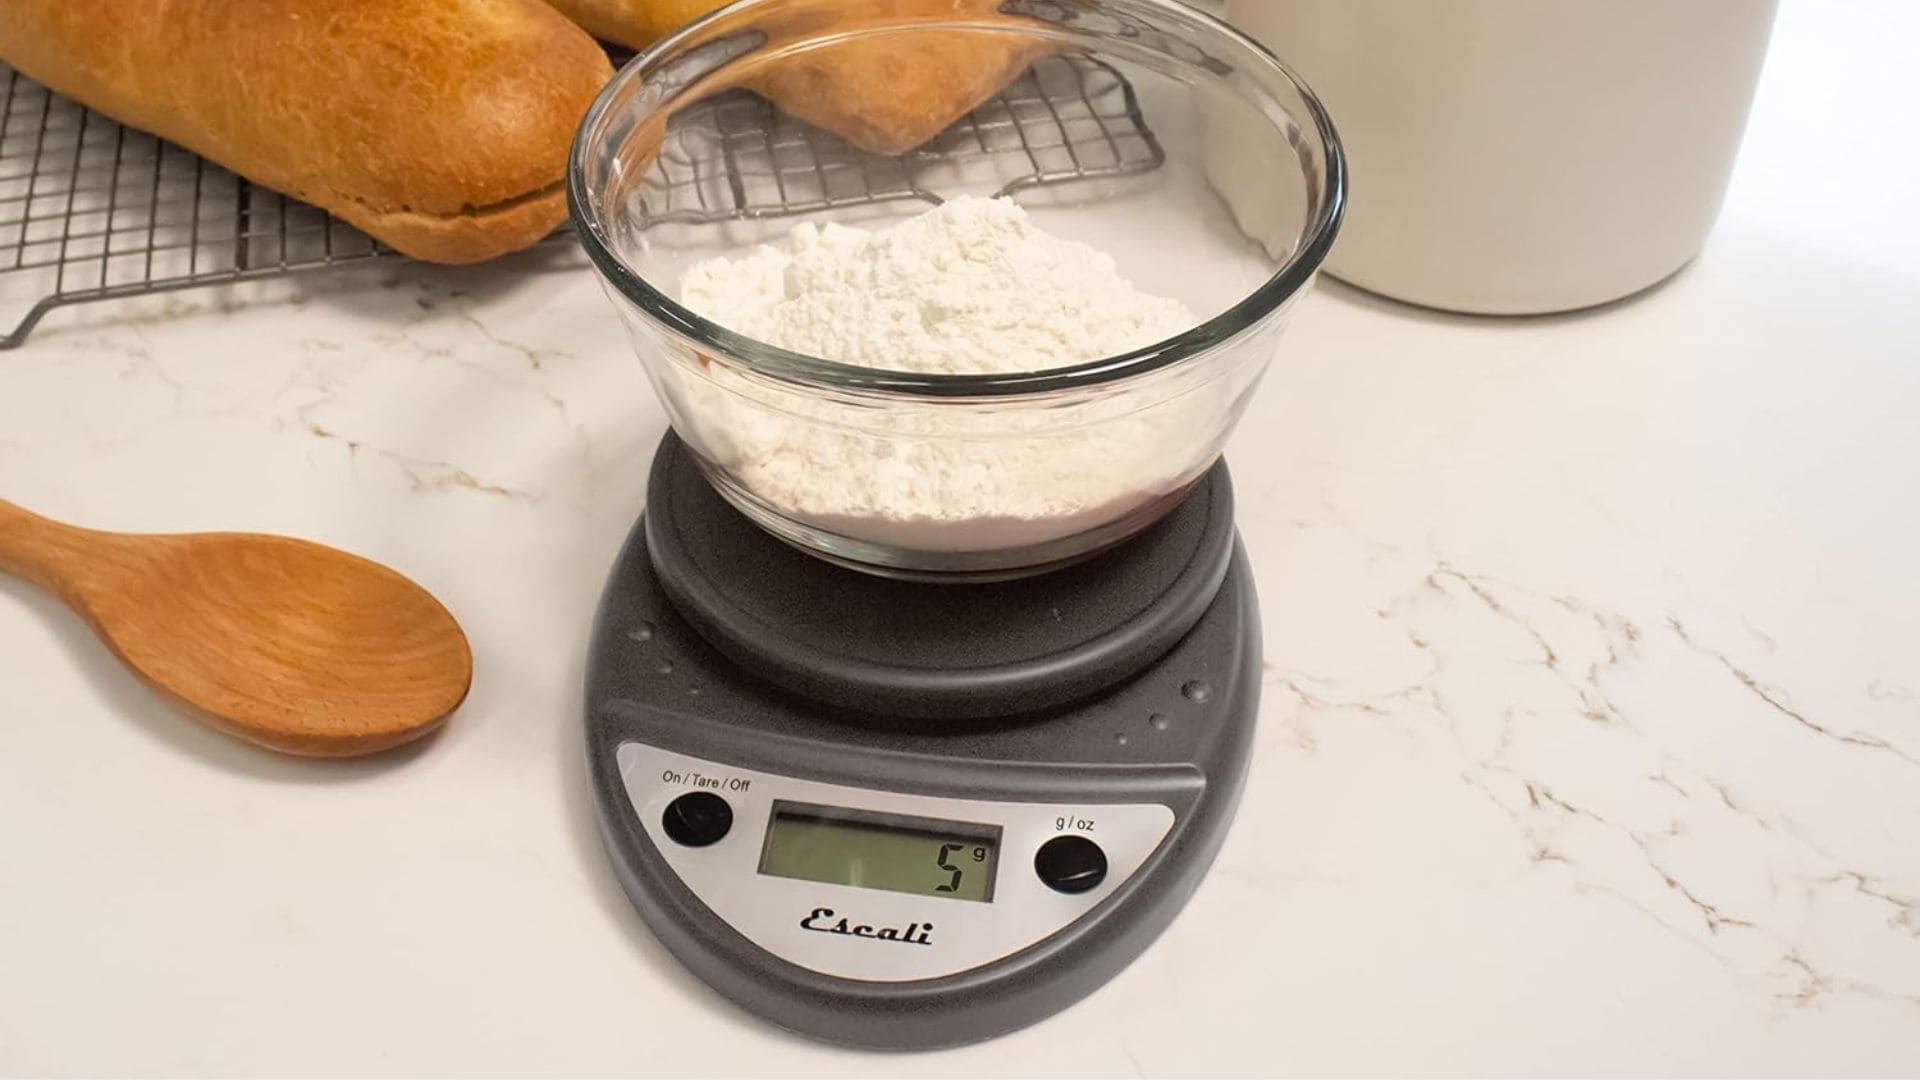 The Best Food Scales: Escali 